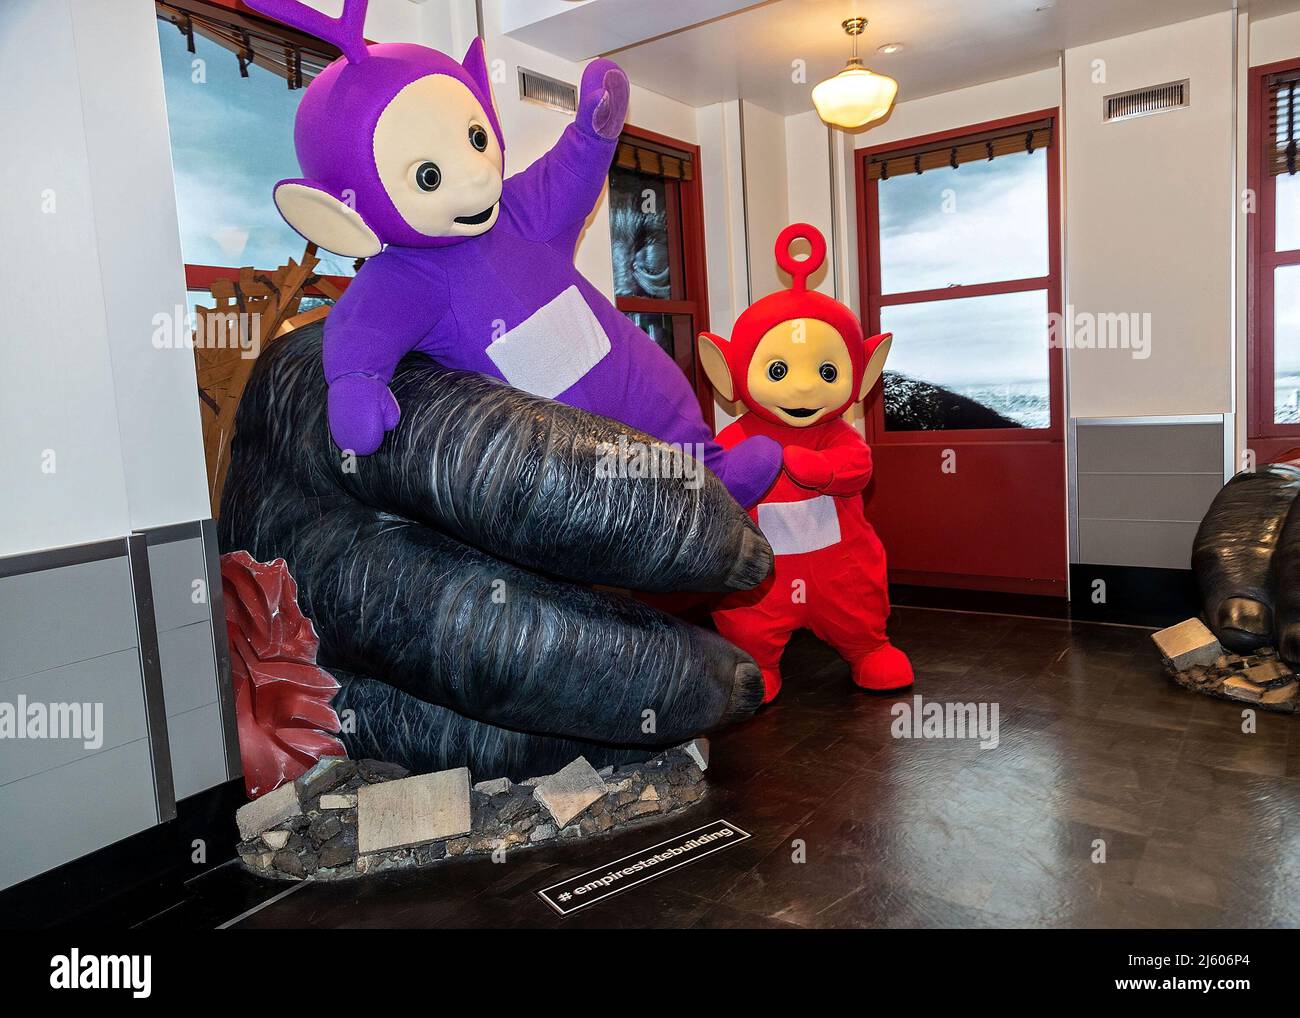 New York, NY, USA. 26th Apr, 2022. Tinky Winky, Po at the Teletubbies ceremonial lighting of the Empire State Building in their iconic colors of purple, green, yellow and red in celebration of their 25th Anniversary year at The Empire State Building. Credit: Steve Mack/Alamy Live News Stock Photo